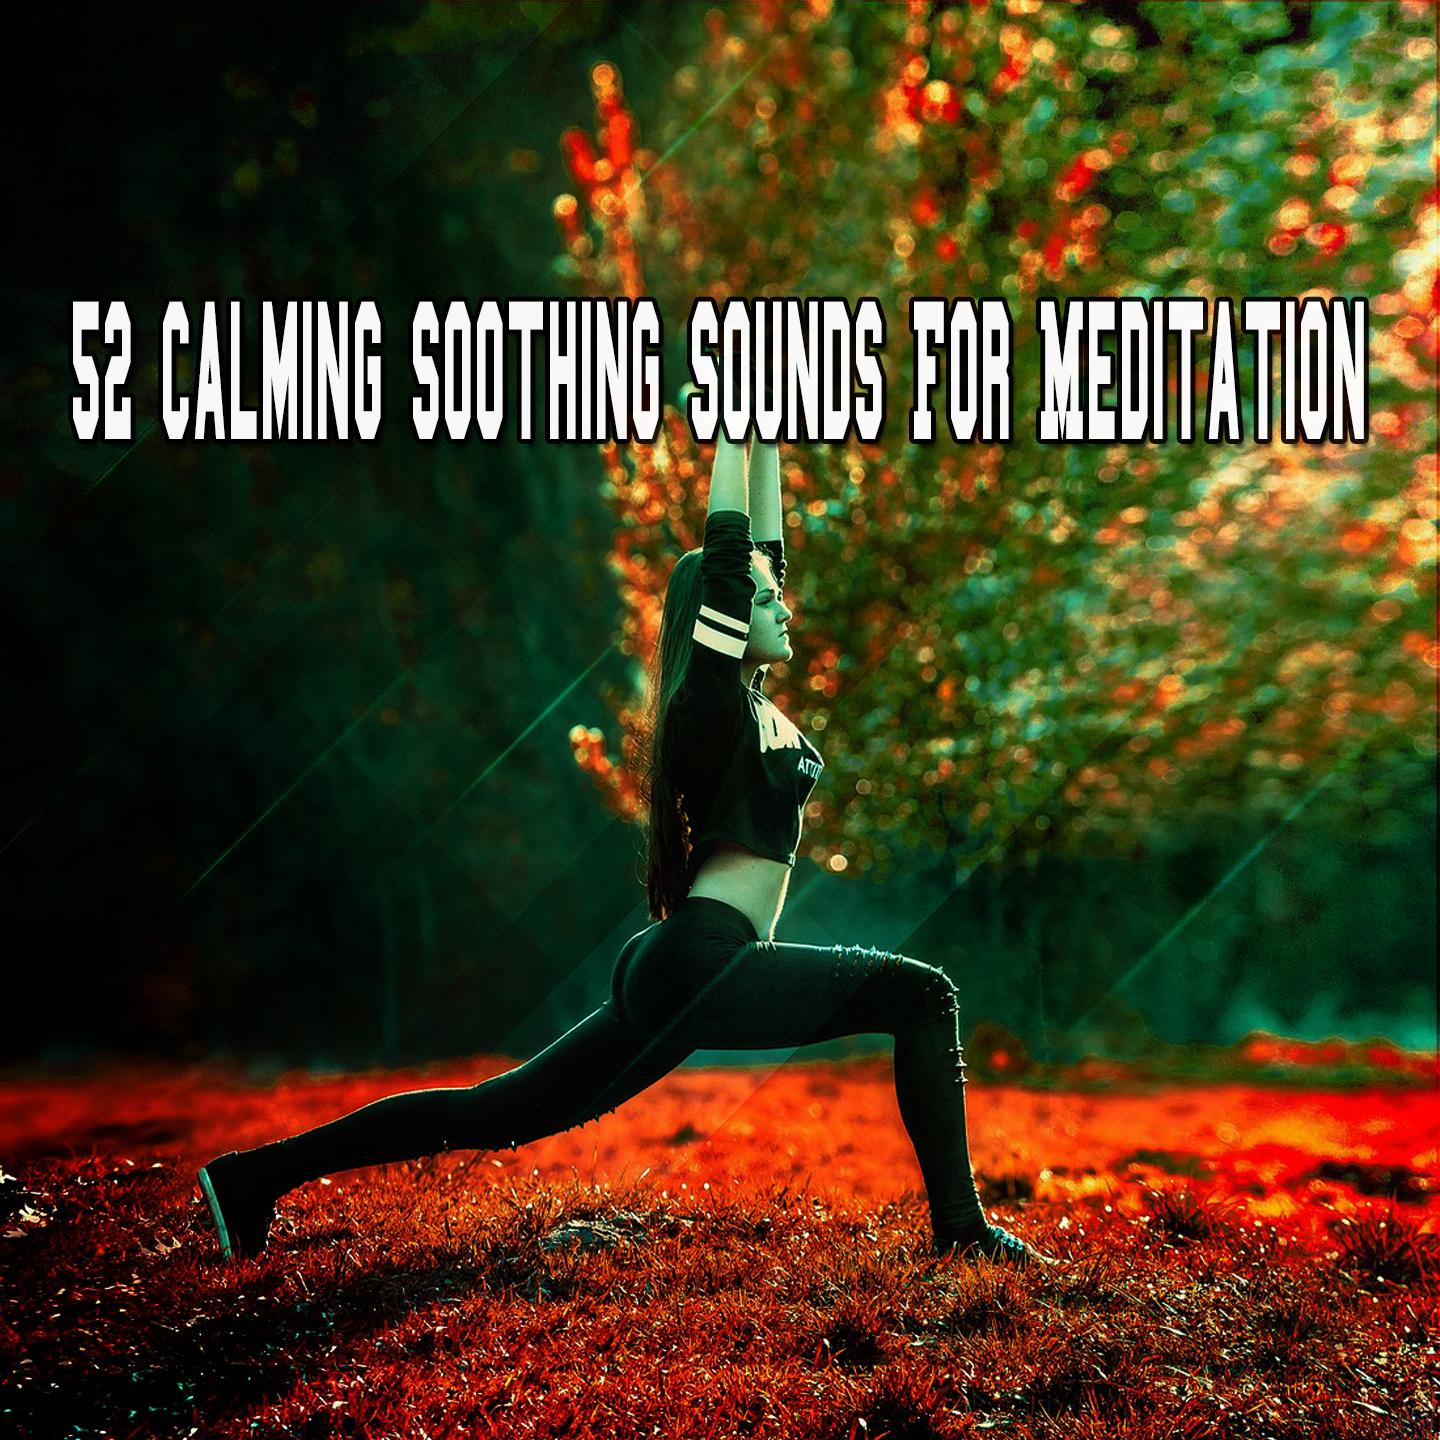 52 Calming Soothing Sounds For Meditation